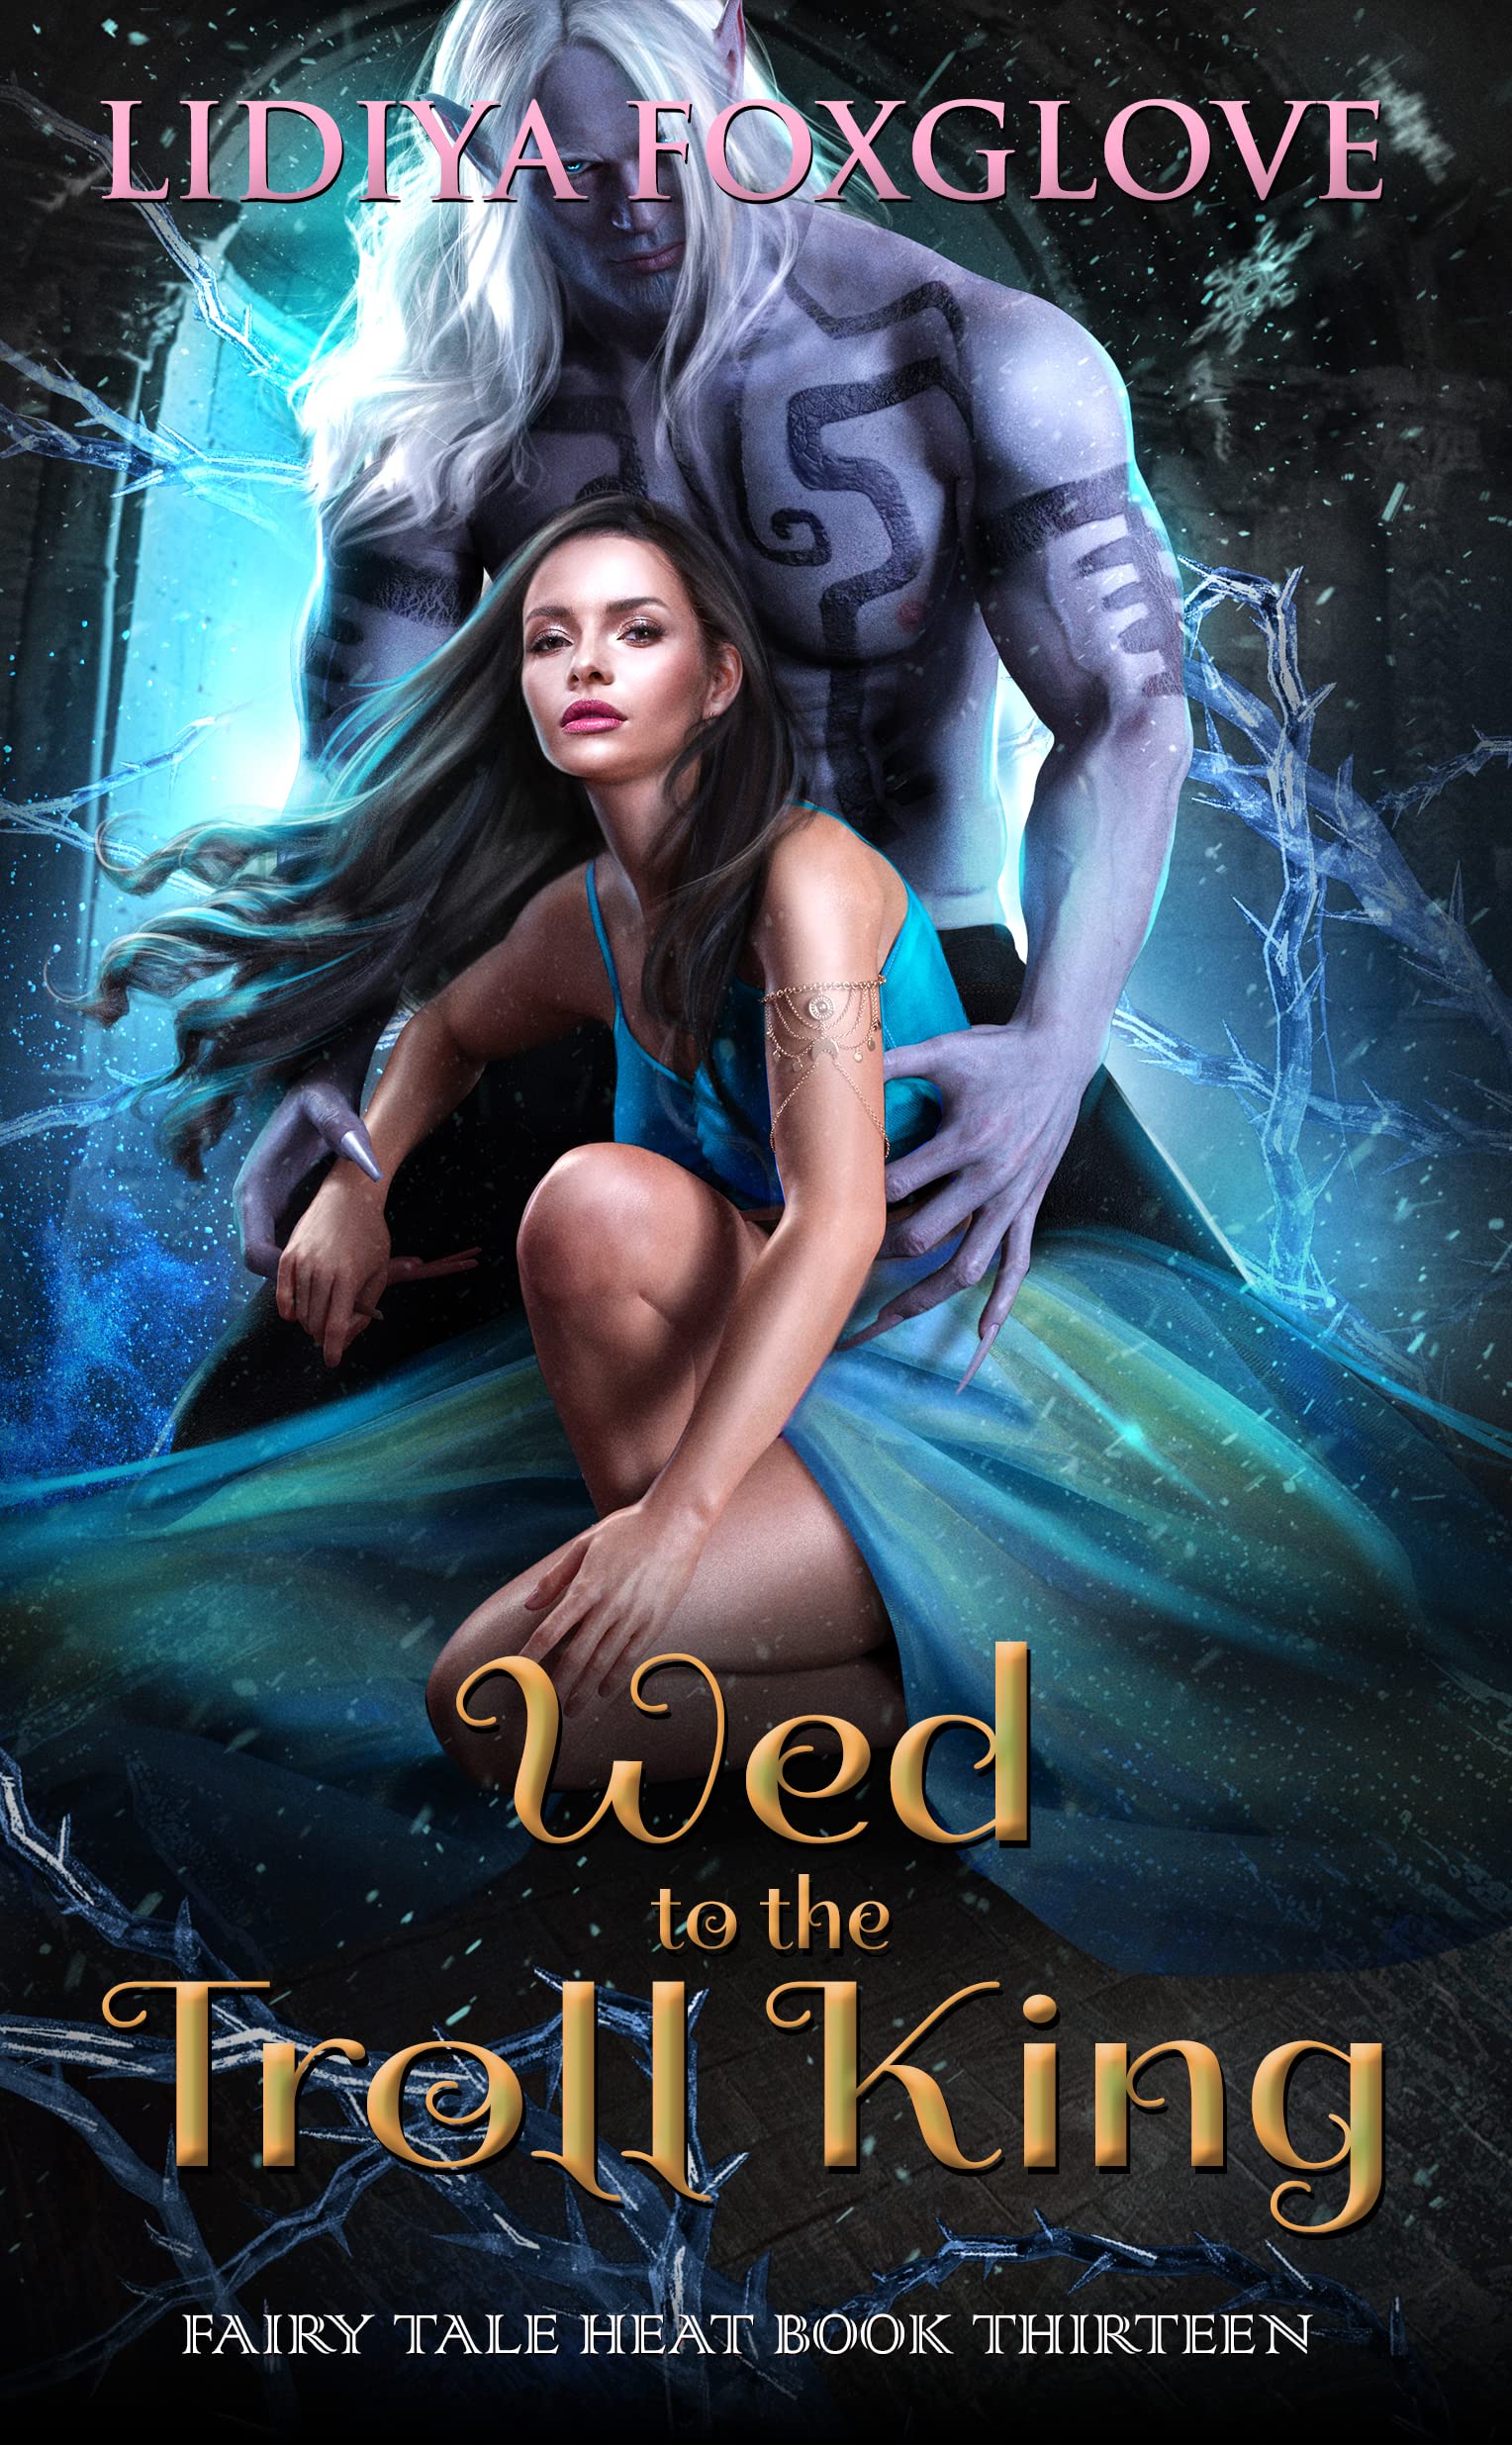 Wed to the Troll King (Fairy Tale Heat Book 13)